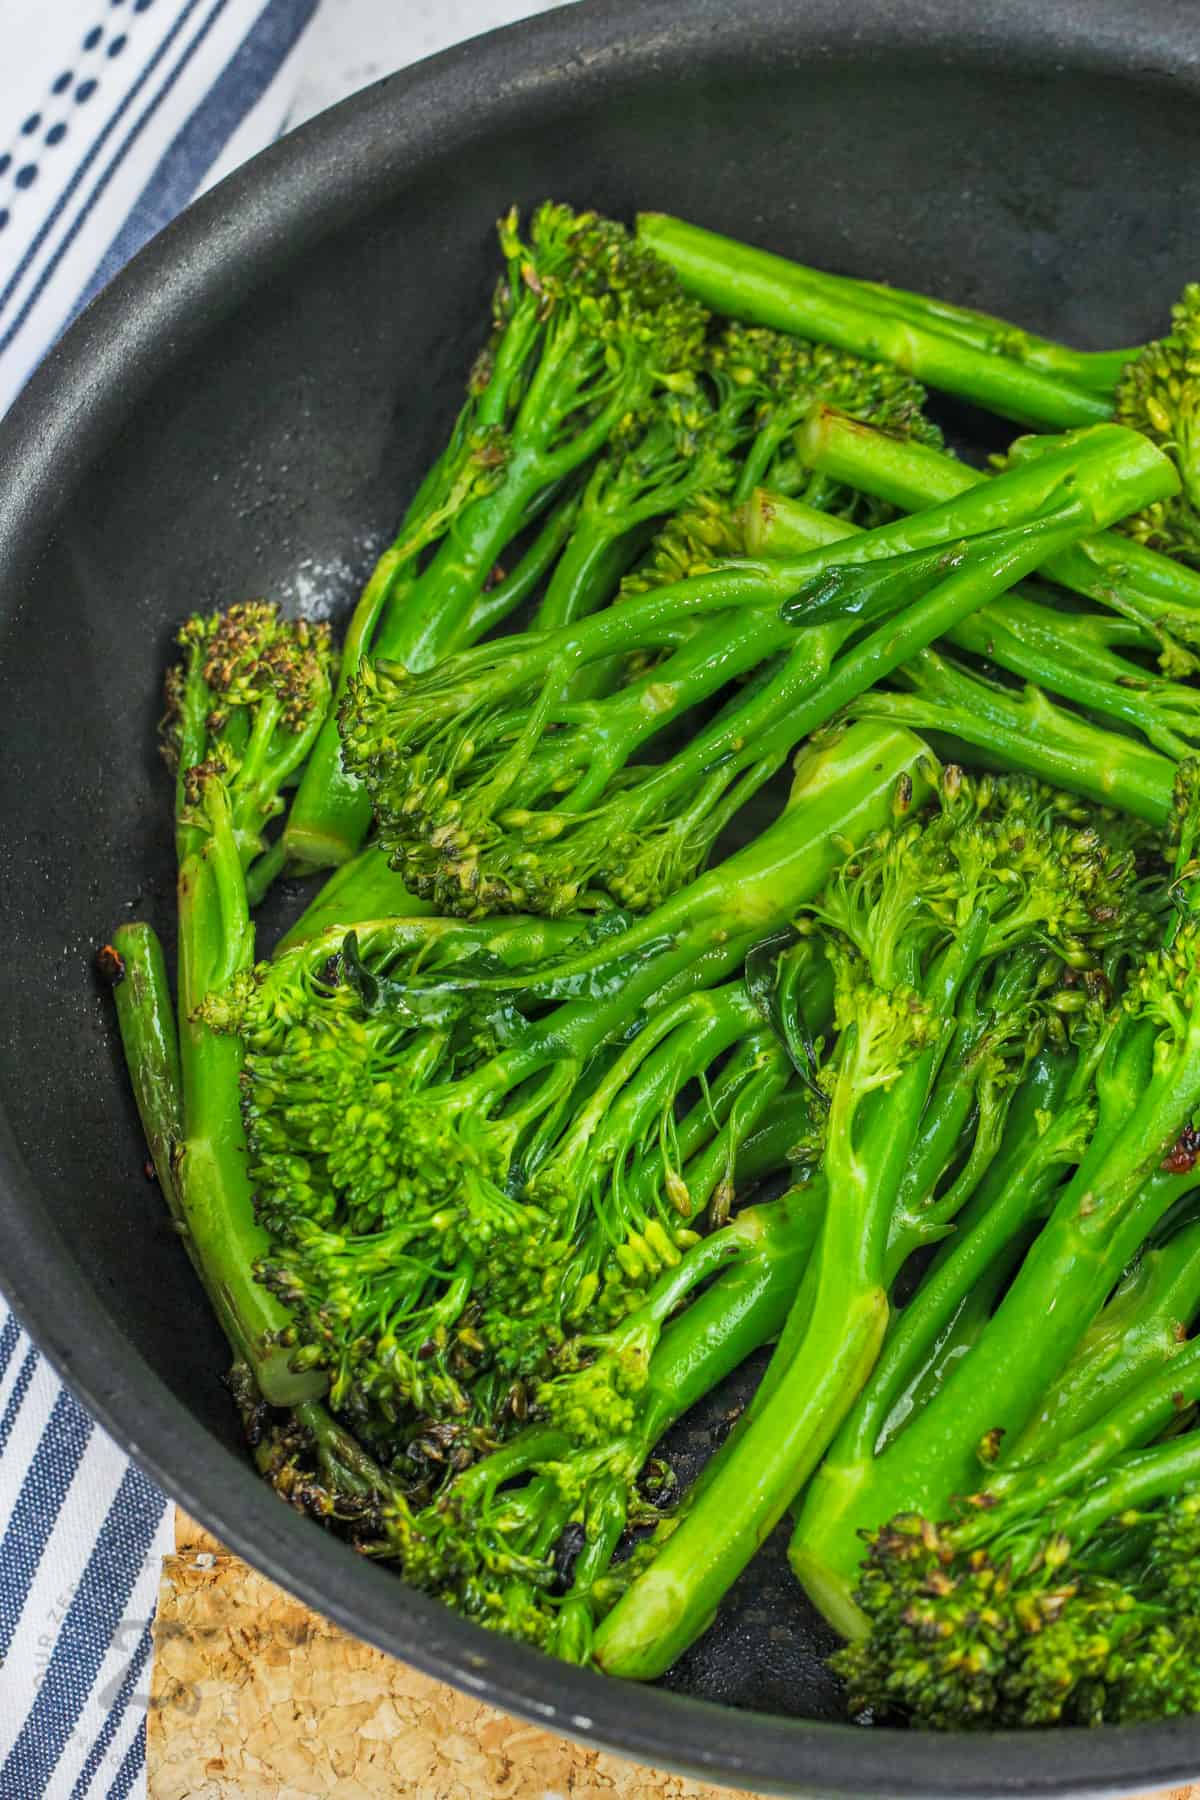 Sauteed Broccolini cooking in the pan